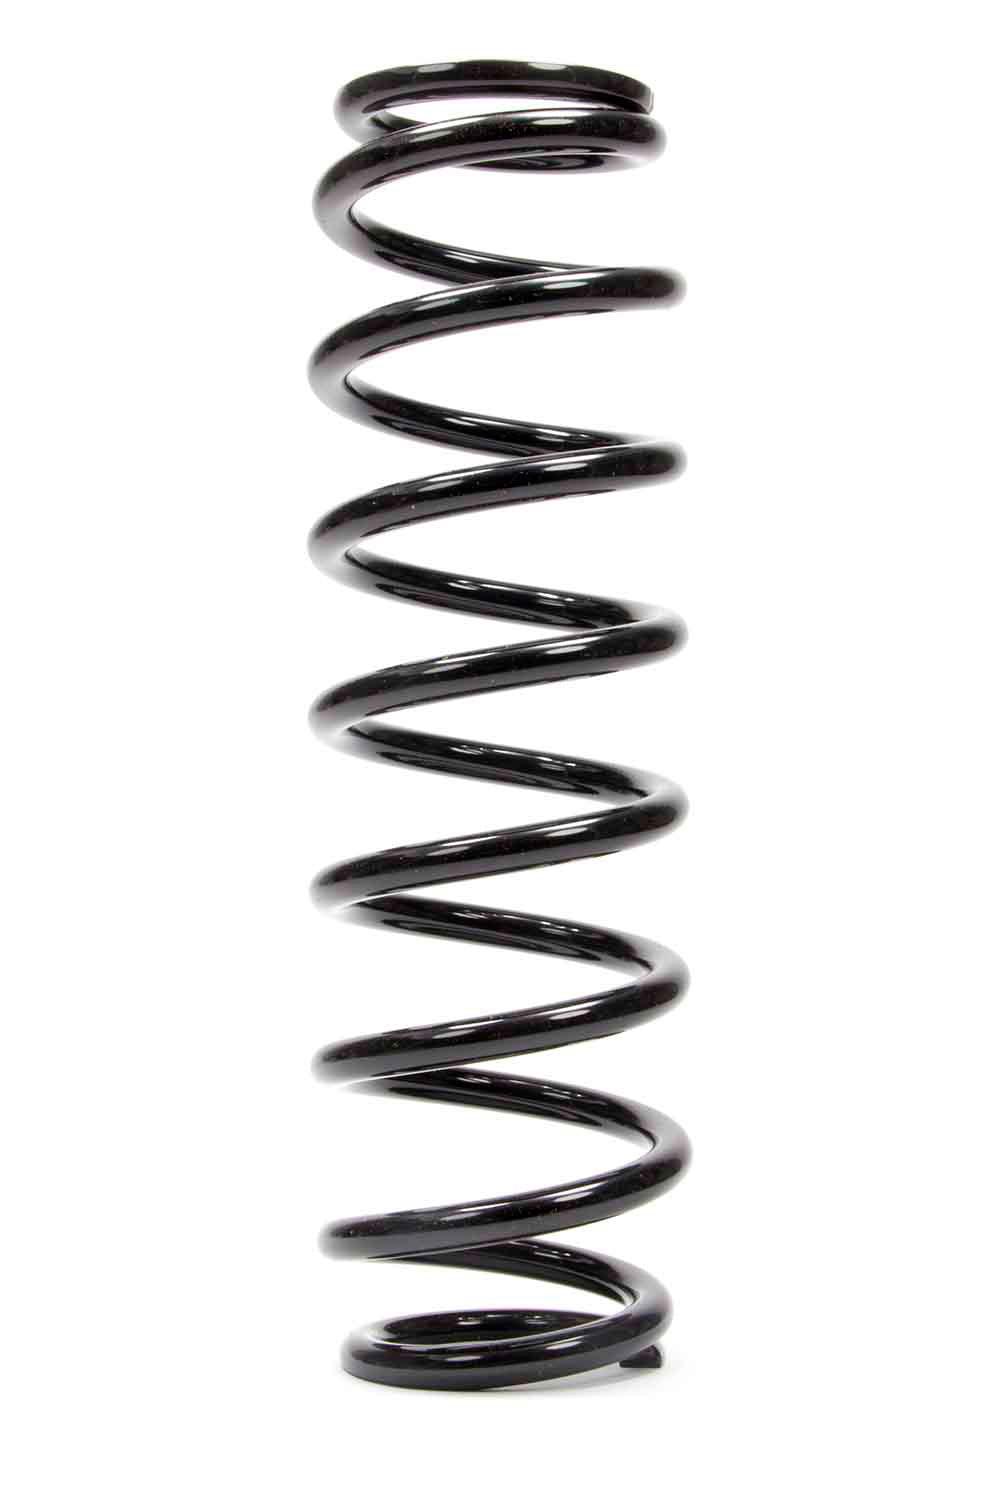 Coil-Over Spring 14in x 2.625in x 200lb - Burlile Performance Products